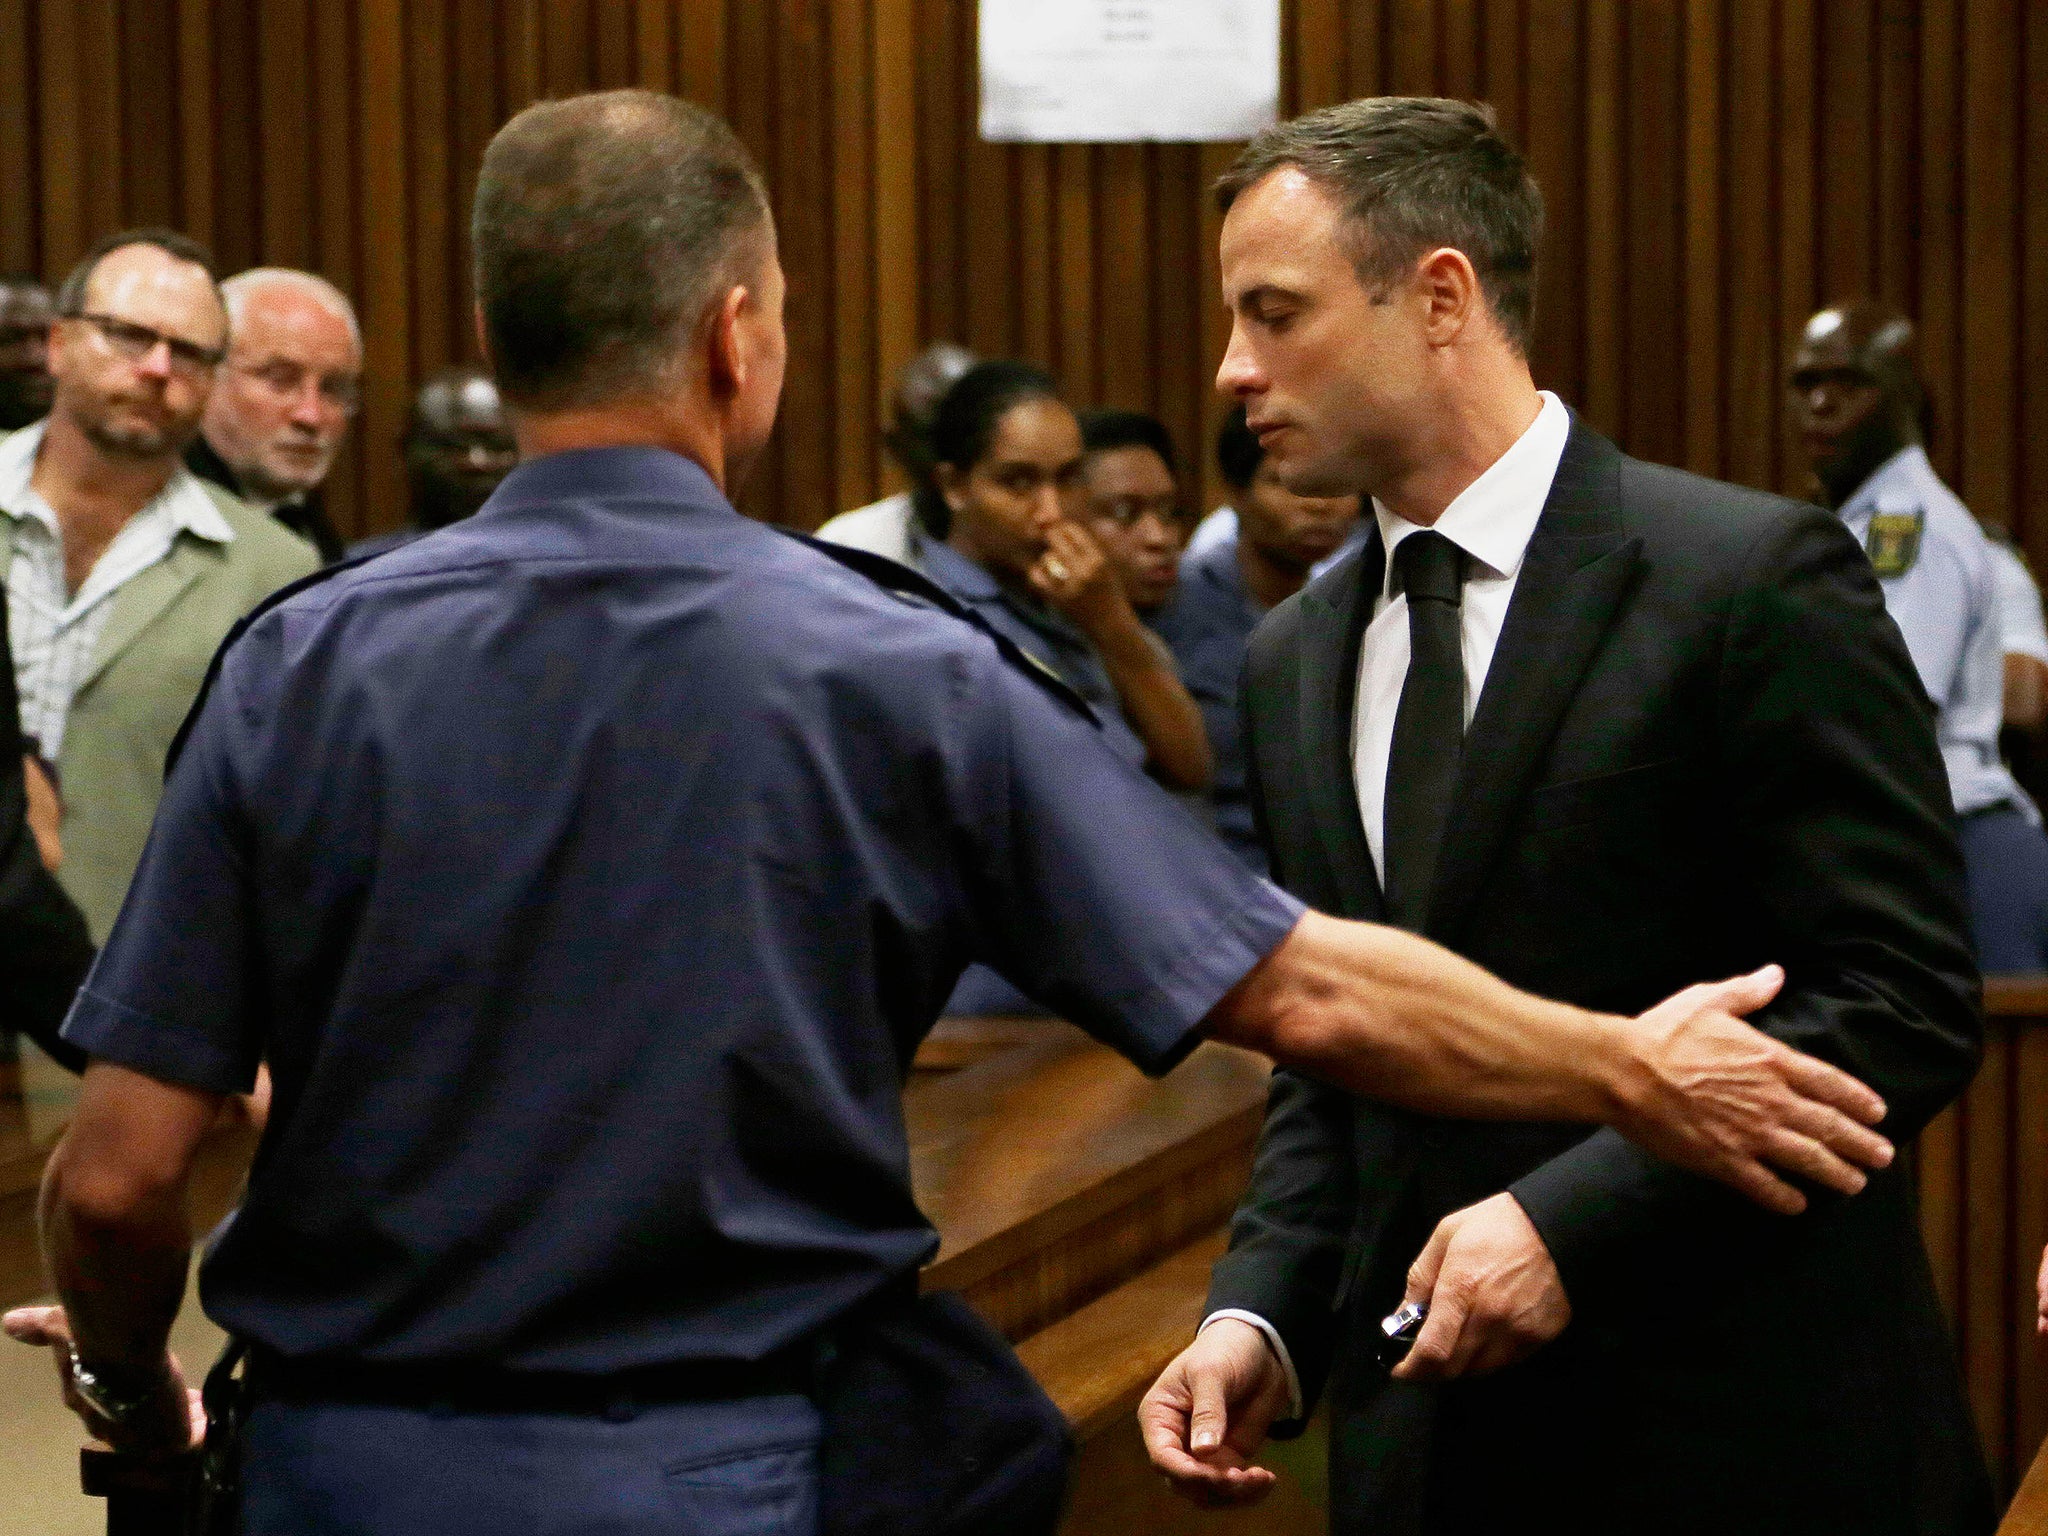 Oscar Pistorius is led out of court in Pretoria. Pistorius received a five-year prison sentence for culpable homicide by judge Thokozile Masipais for the killing of his girlfriend Reeva Steenkamp